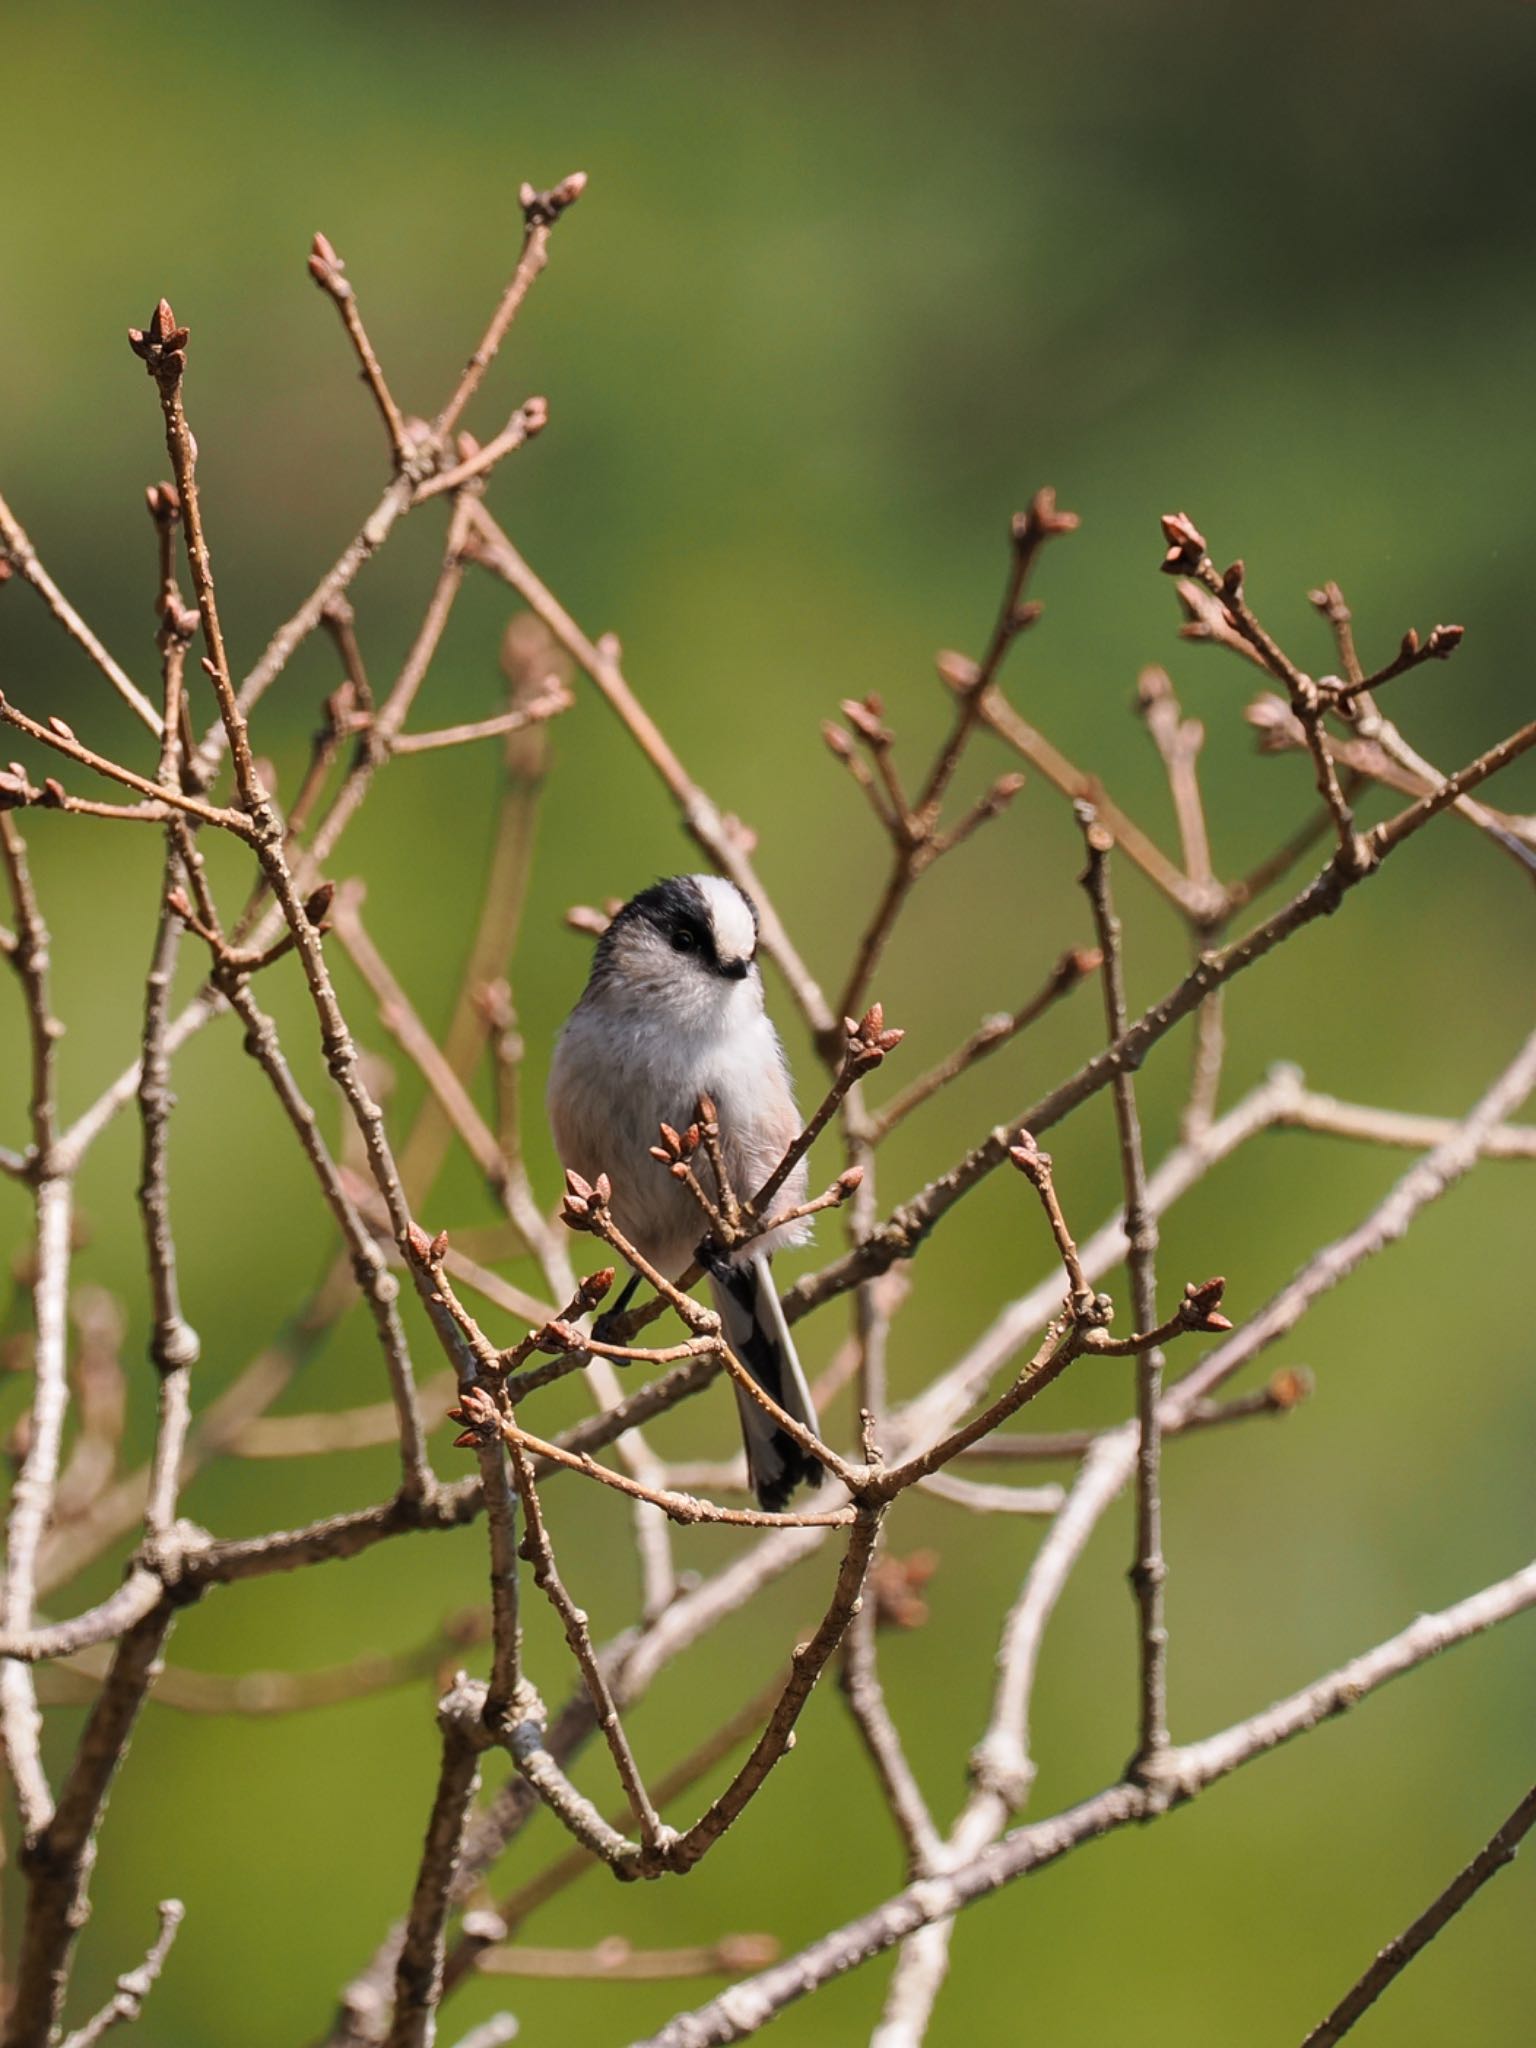 Photo of Long-tailed Tit at 再度公園 by daffy@お散歩探鳥＆遠征探鳥♪